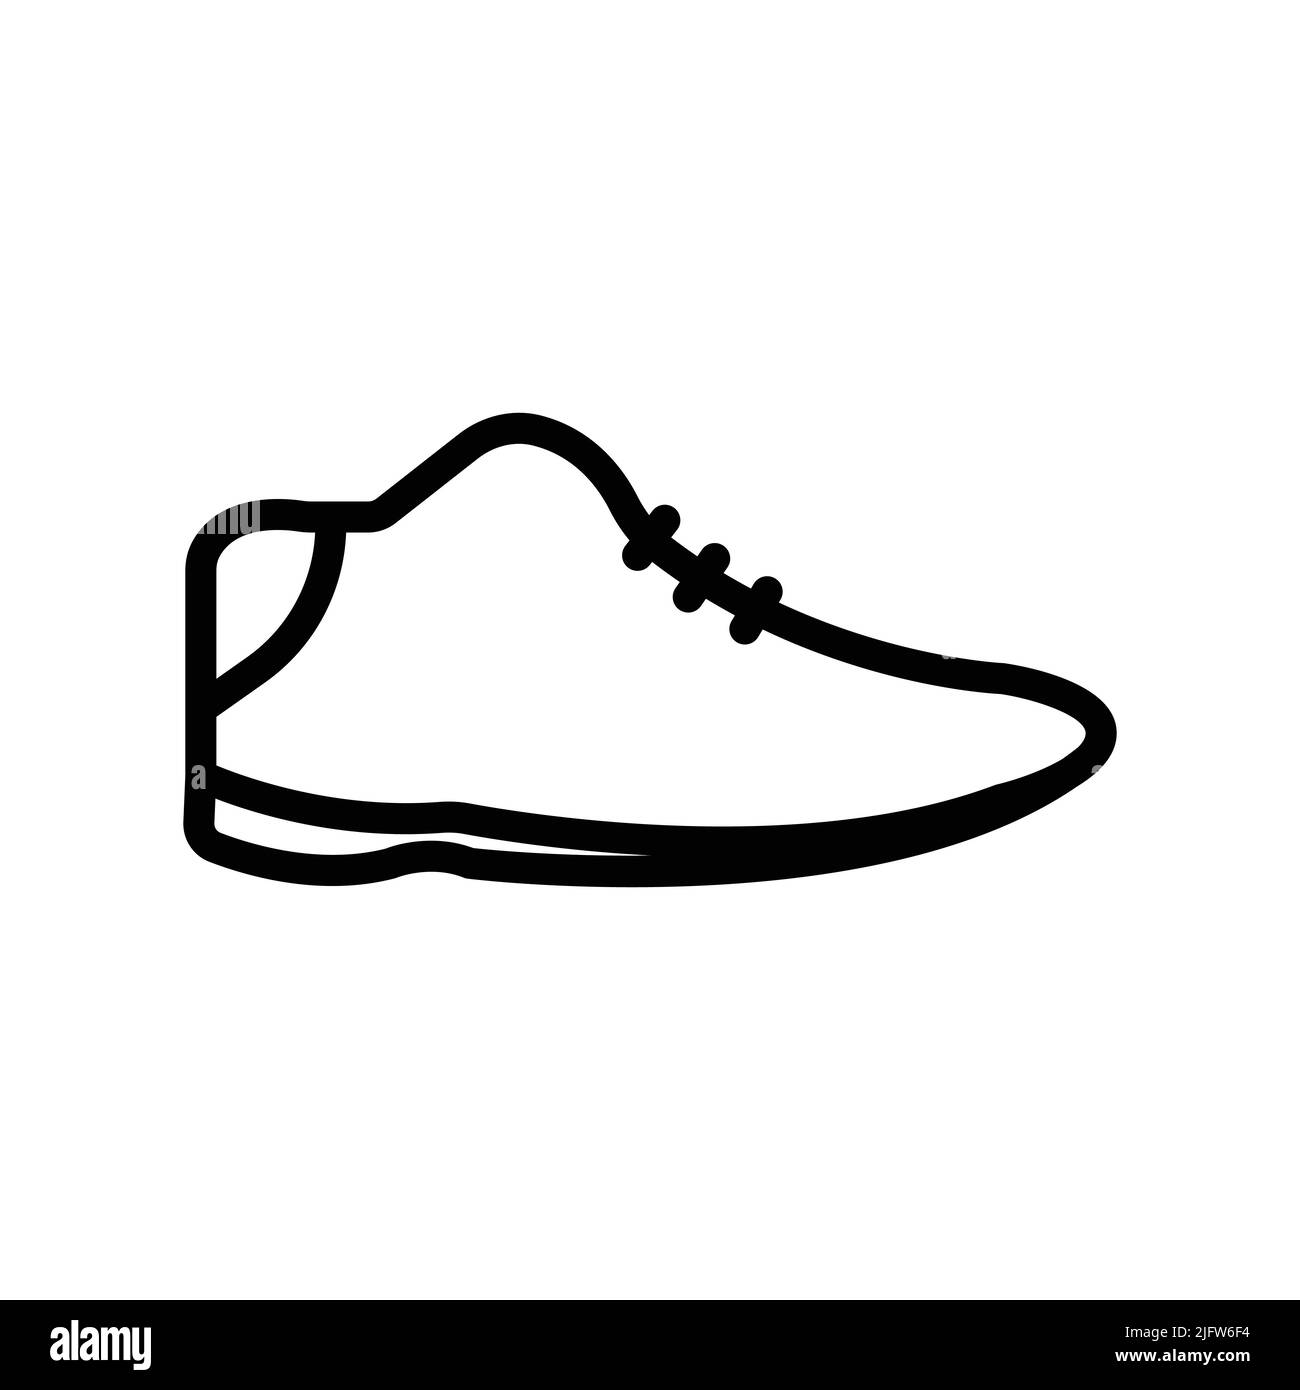 Shoes icon. Suitable for accessories icon. line icon style. Simple design editable Stock Vector